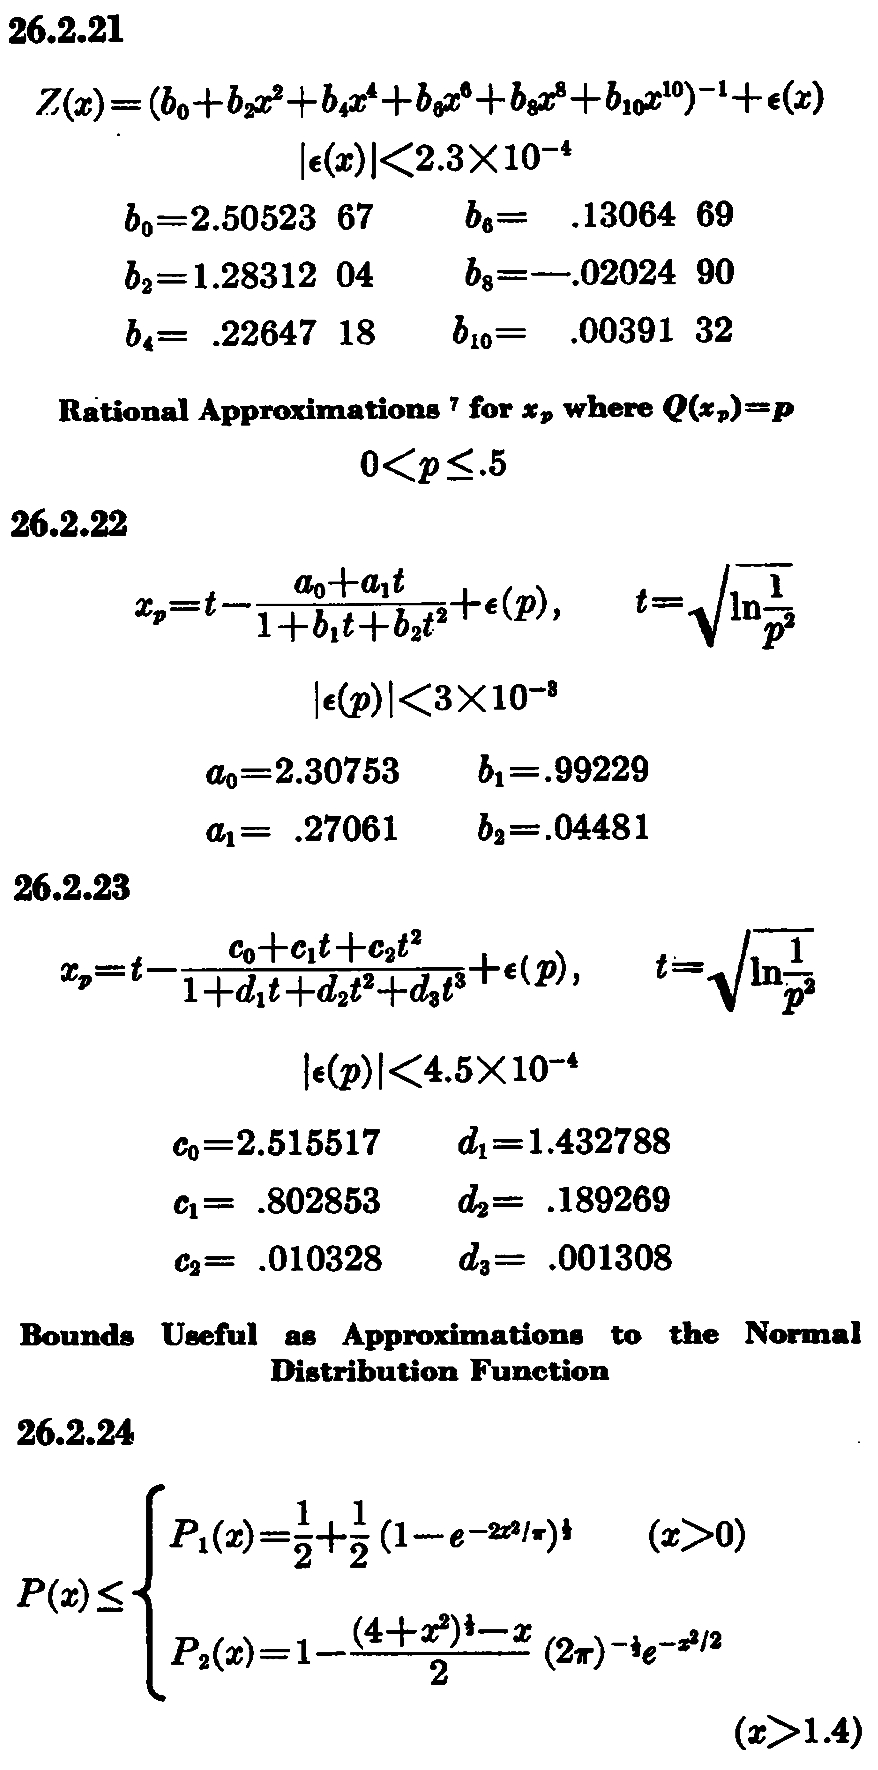 Handbook_of_Mathematical_Functions_with_FGMT page 933 左栏_拉曲线.jpg